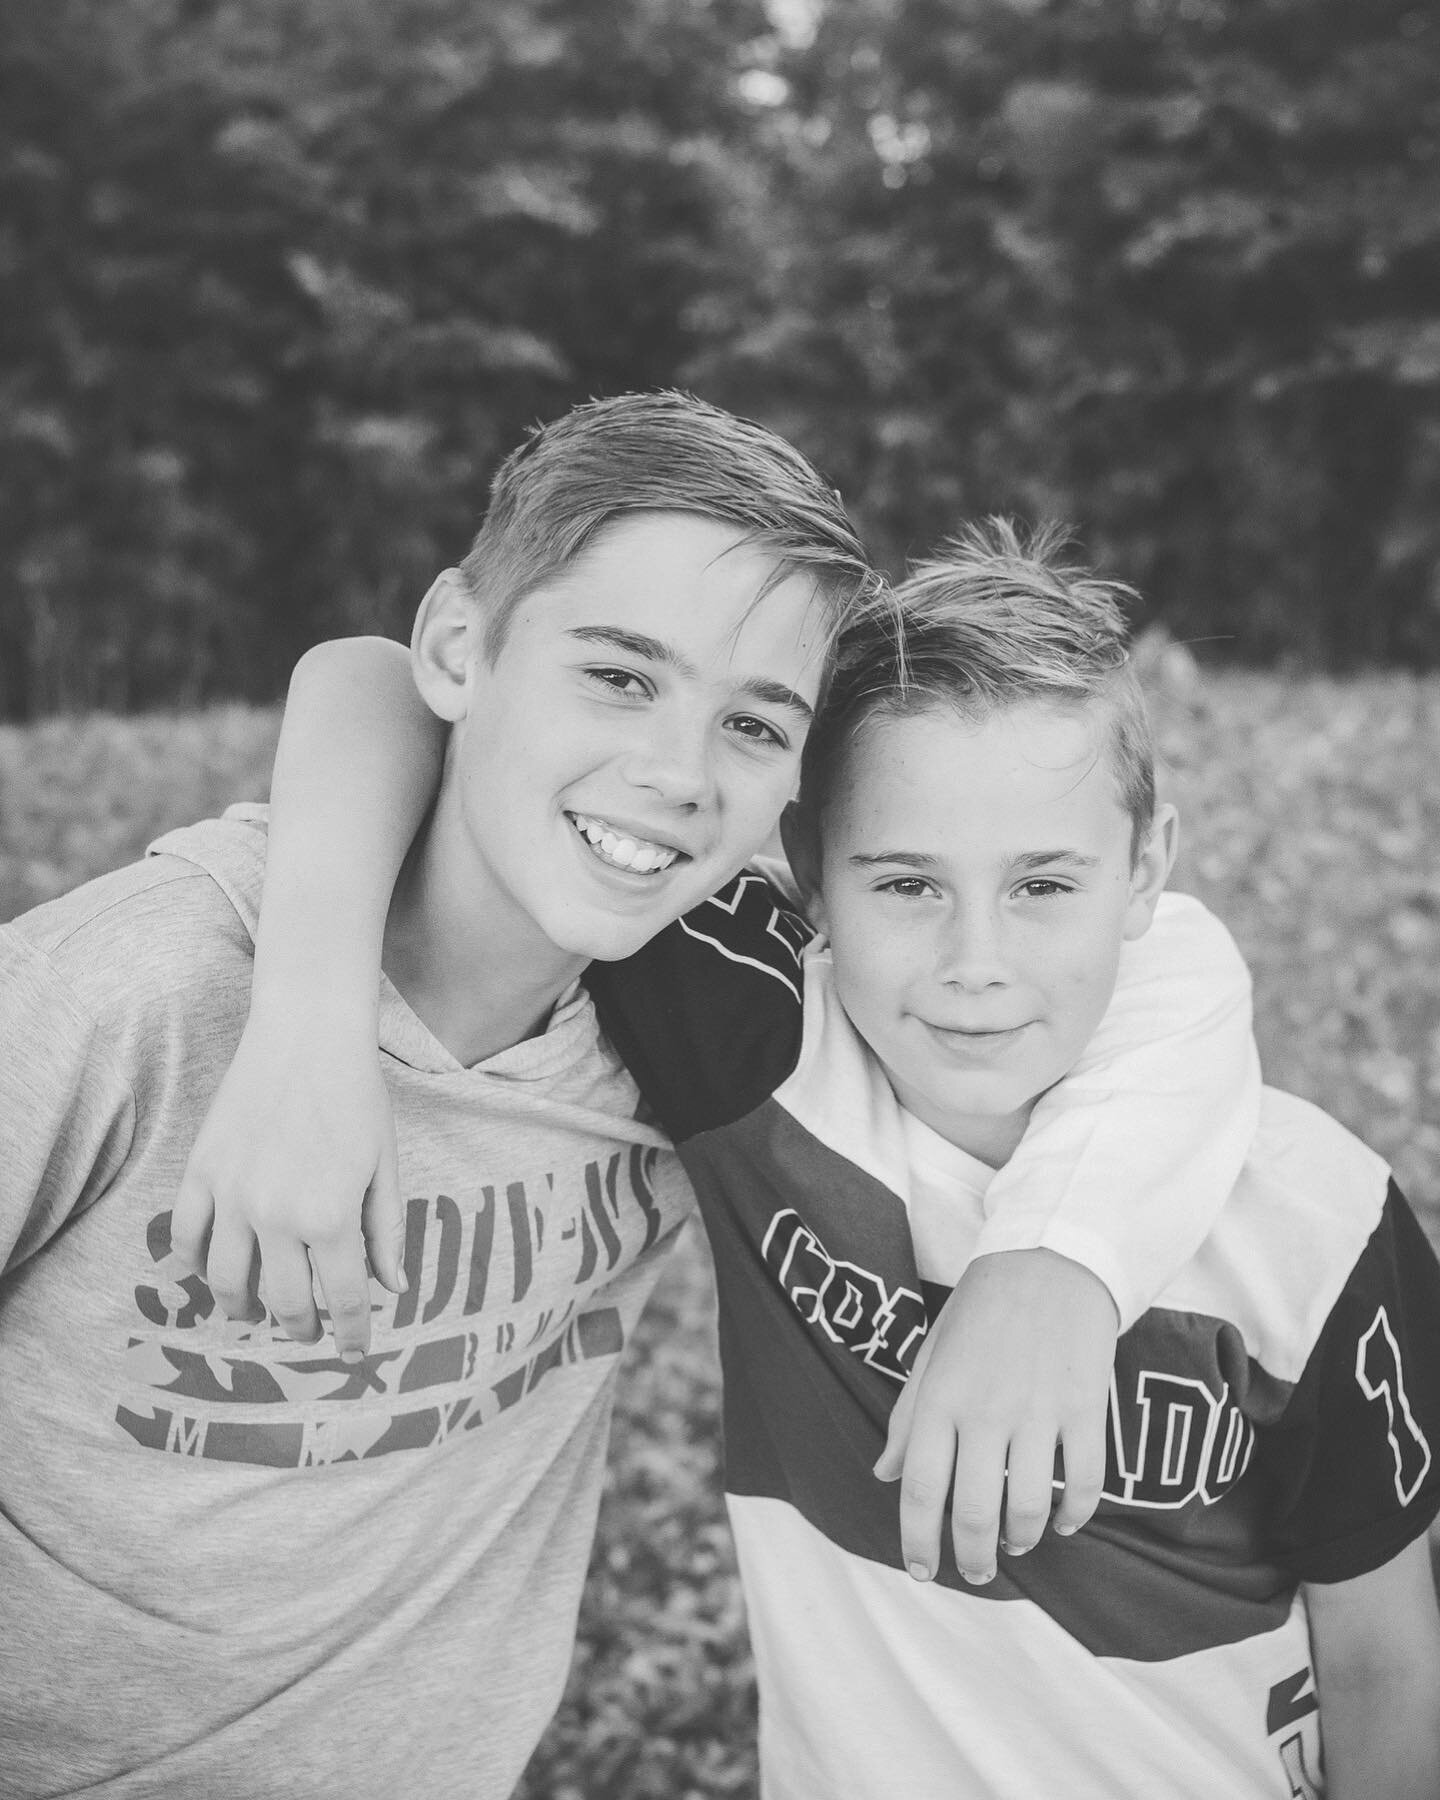 Brothers :: The final in the series - also from the archives. These brothers had such a natural affection for each other, I remember we didn&rsquo;t even need to pose them. This was from one of the biggest family shoots we&rsquo;ve ever done (16 peop